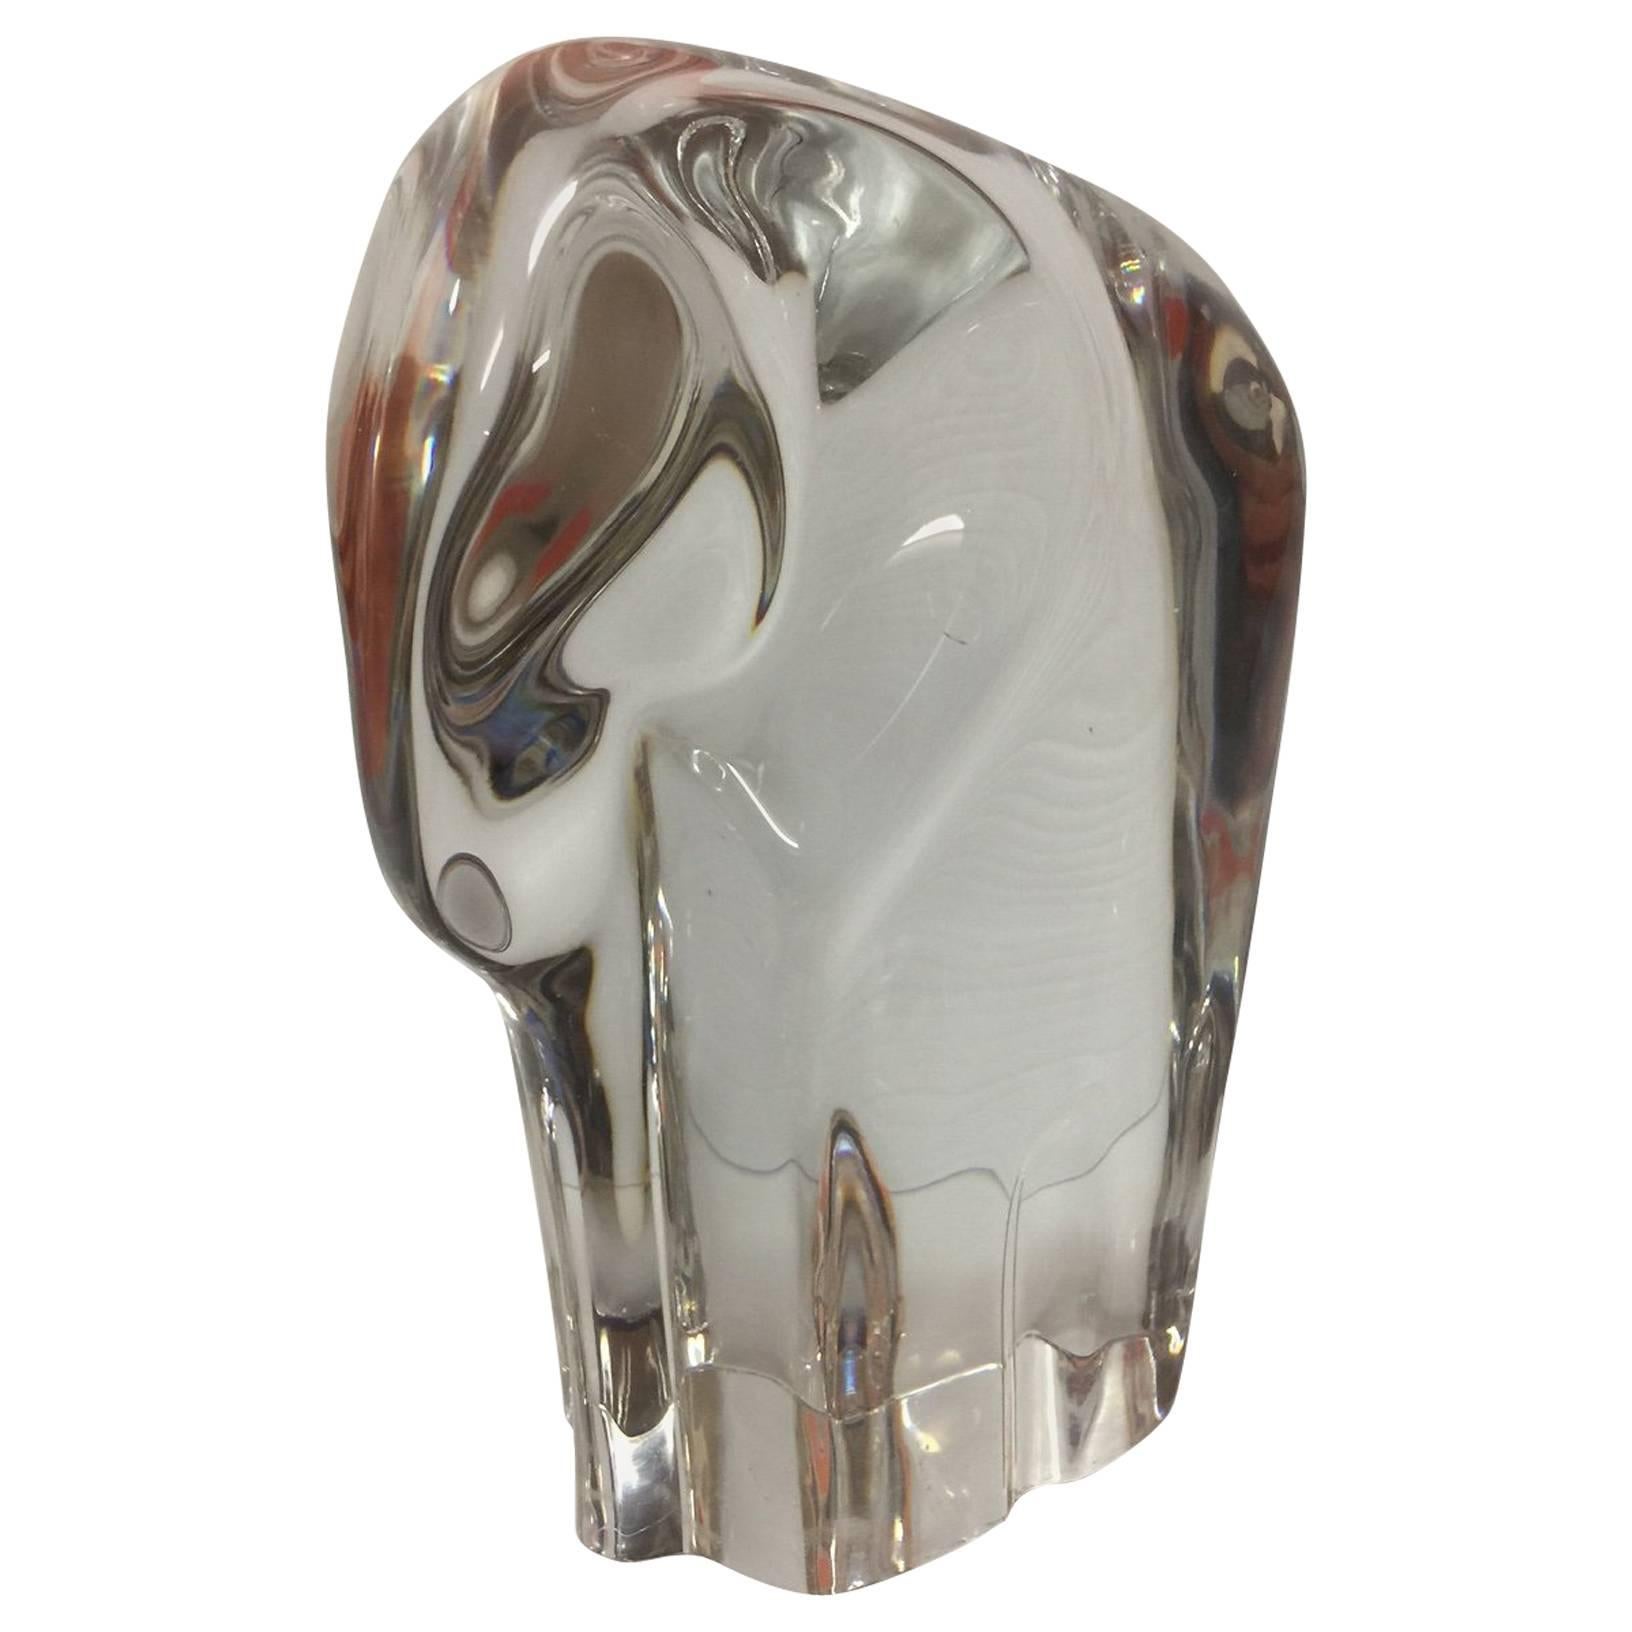 Modernist Crystal Elephant by Olle Alberius for Orrefors